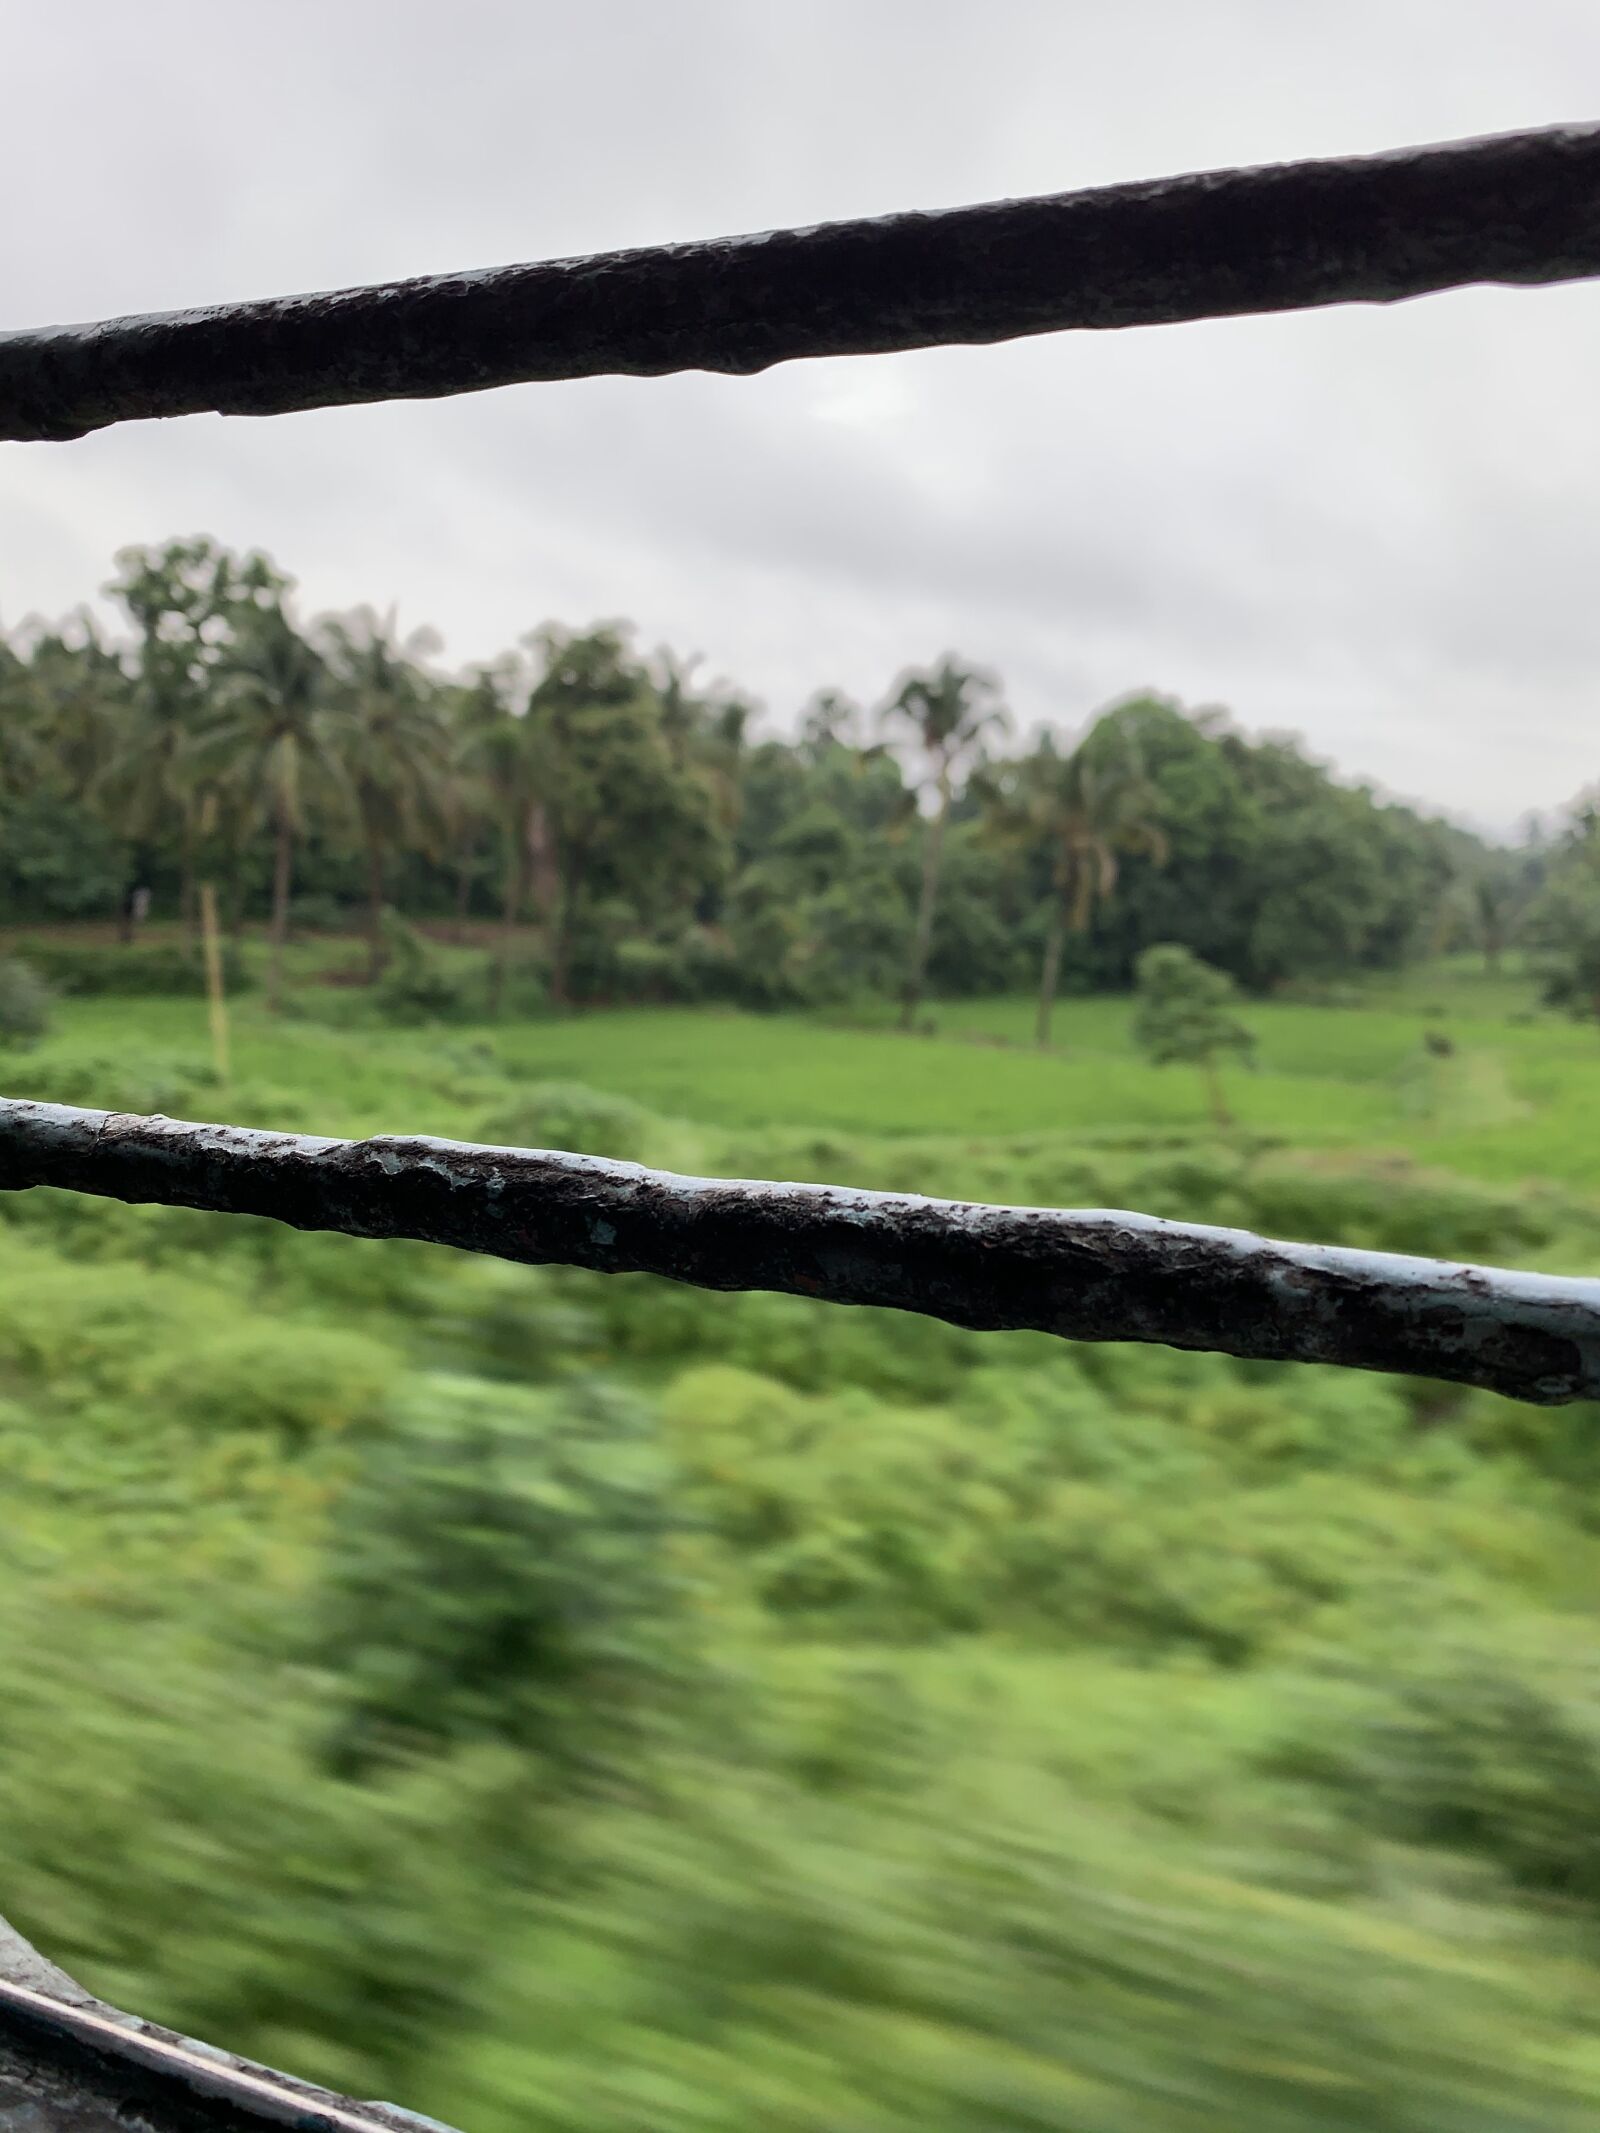 Apple iPhone XS Max + iPhone XS Max back dual camera 4.25mm f/1.8 sample photo. India, train, travel photography